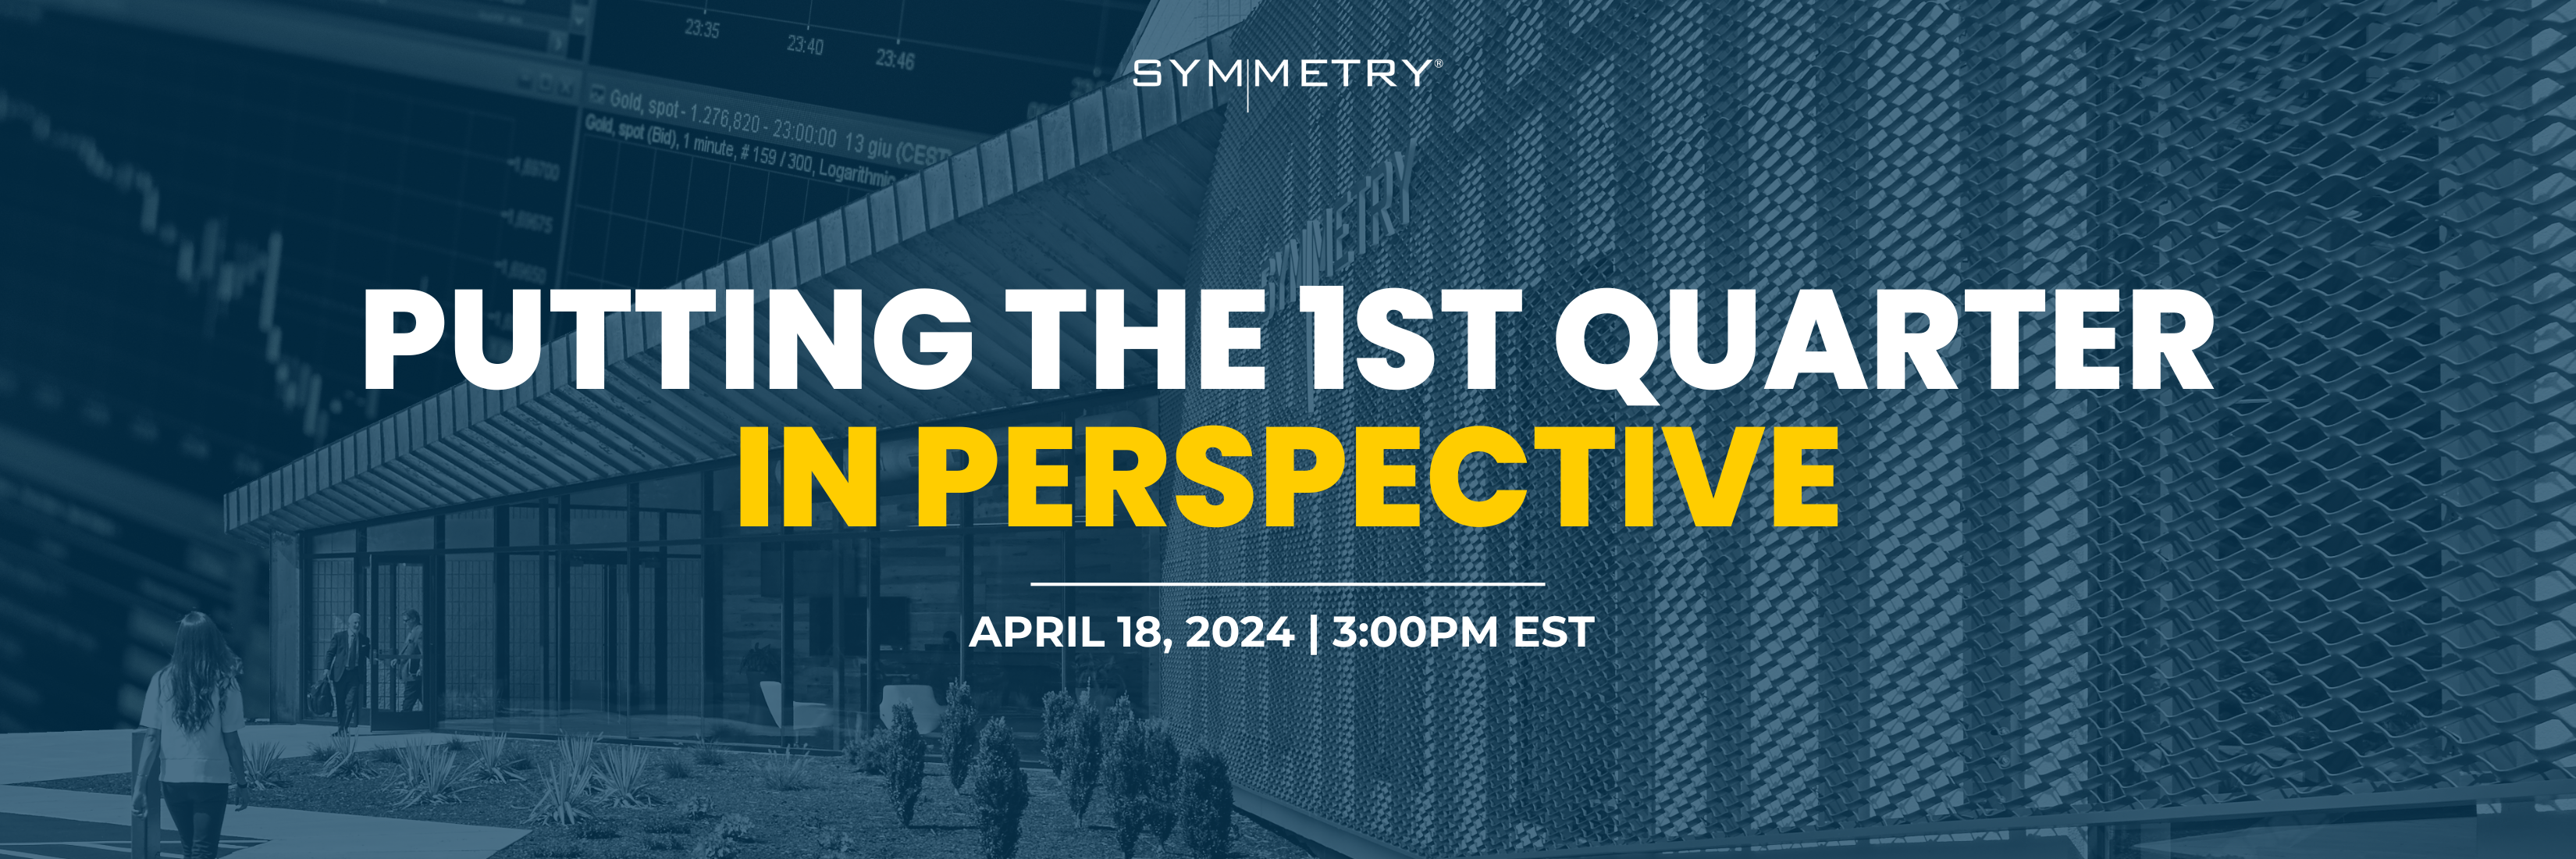 Putting the 1st Quarter 2024 In Perspective webinar